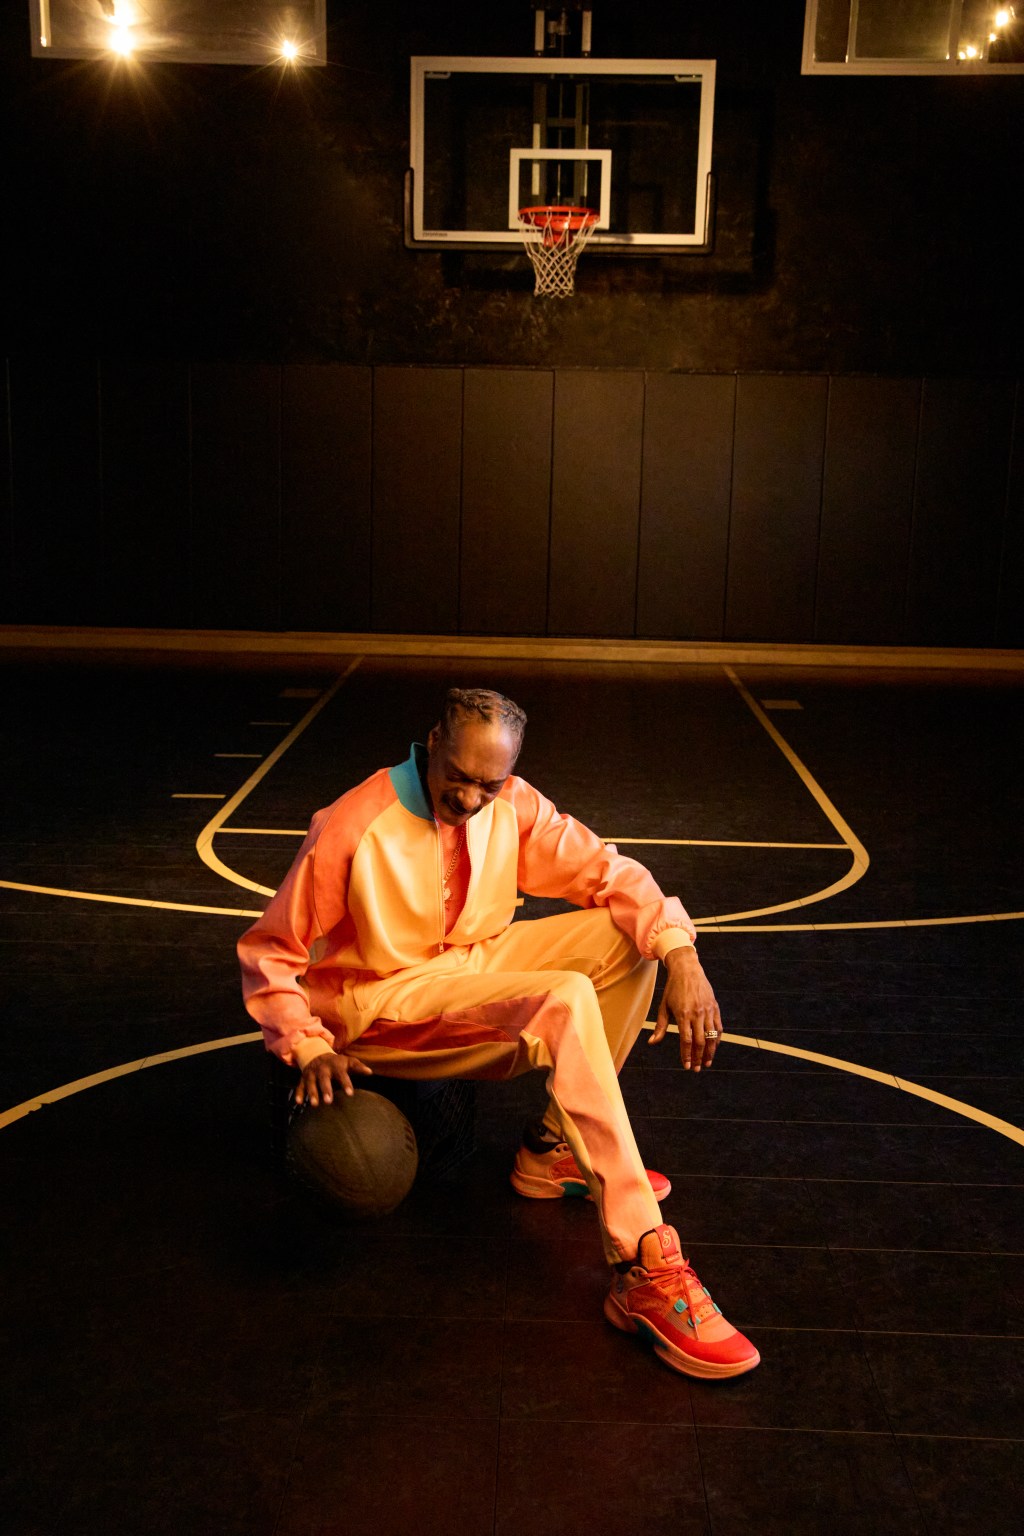 Skechers & Snoop Dogg Collab For Colorful New Basketball Sneakers - Maxim